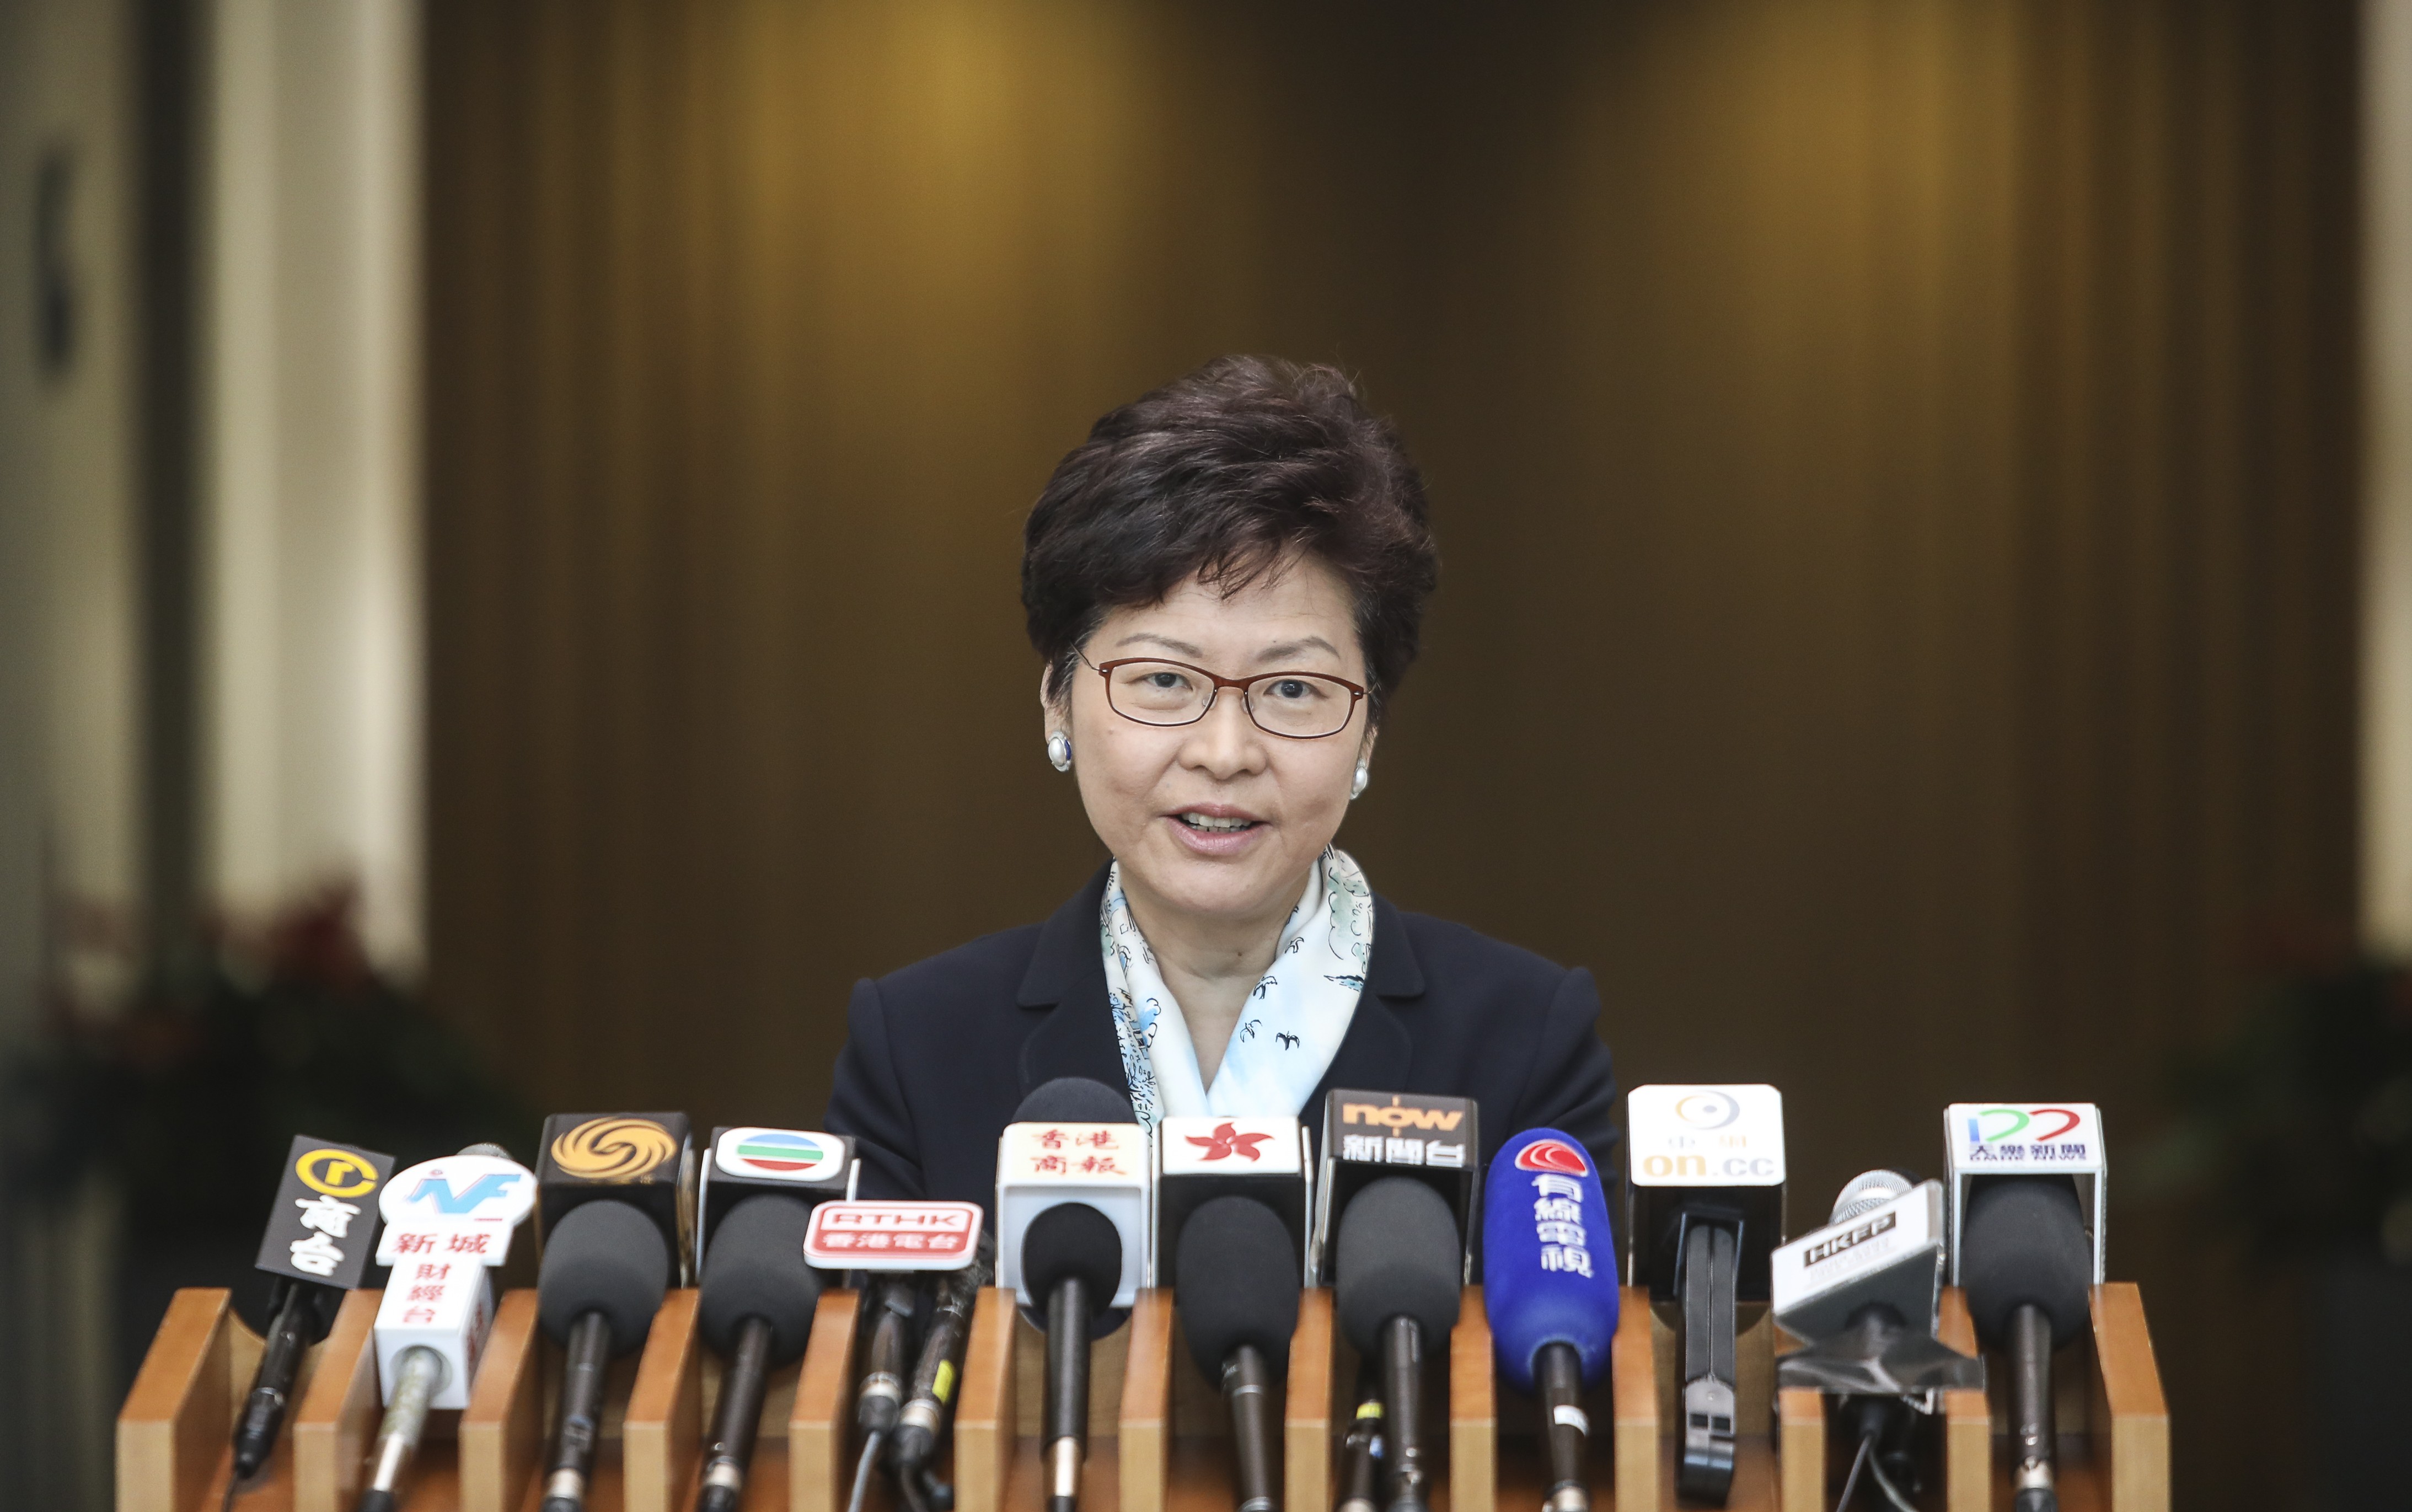 Hong Kong Chief Executive Carrie Lam meets the media before an Executive Council meeting in Tamar. Lam has made subsidised public home ownership central to her agenda to addressing housing. Photo: Sam Tsang